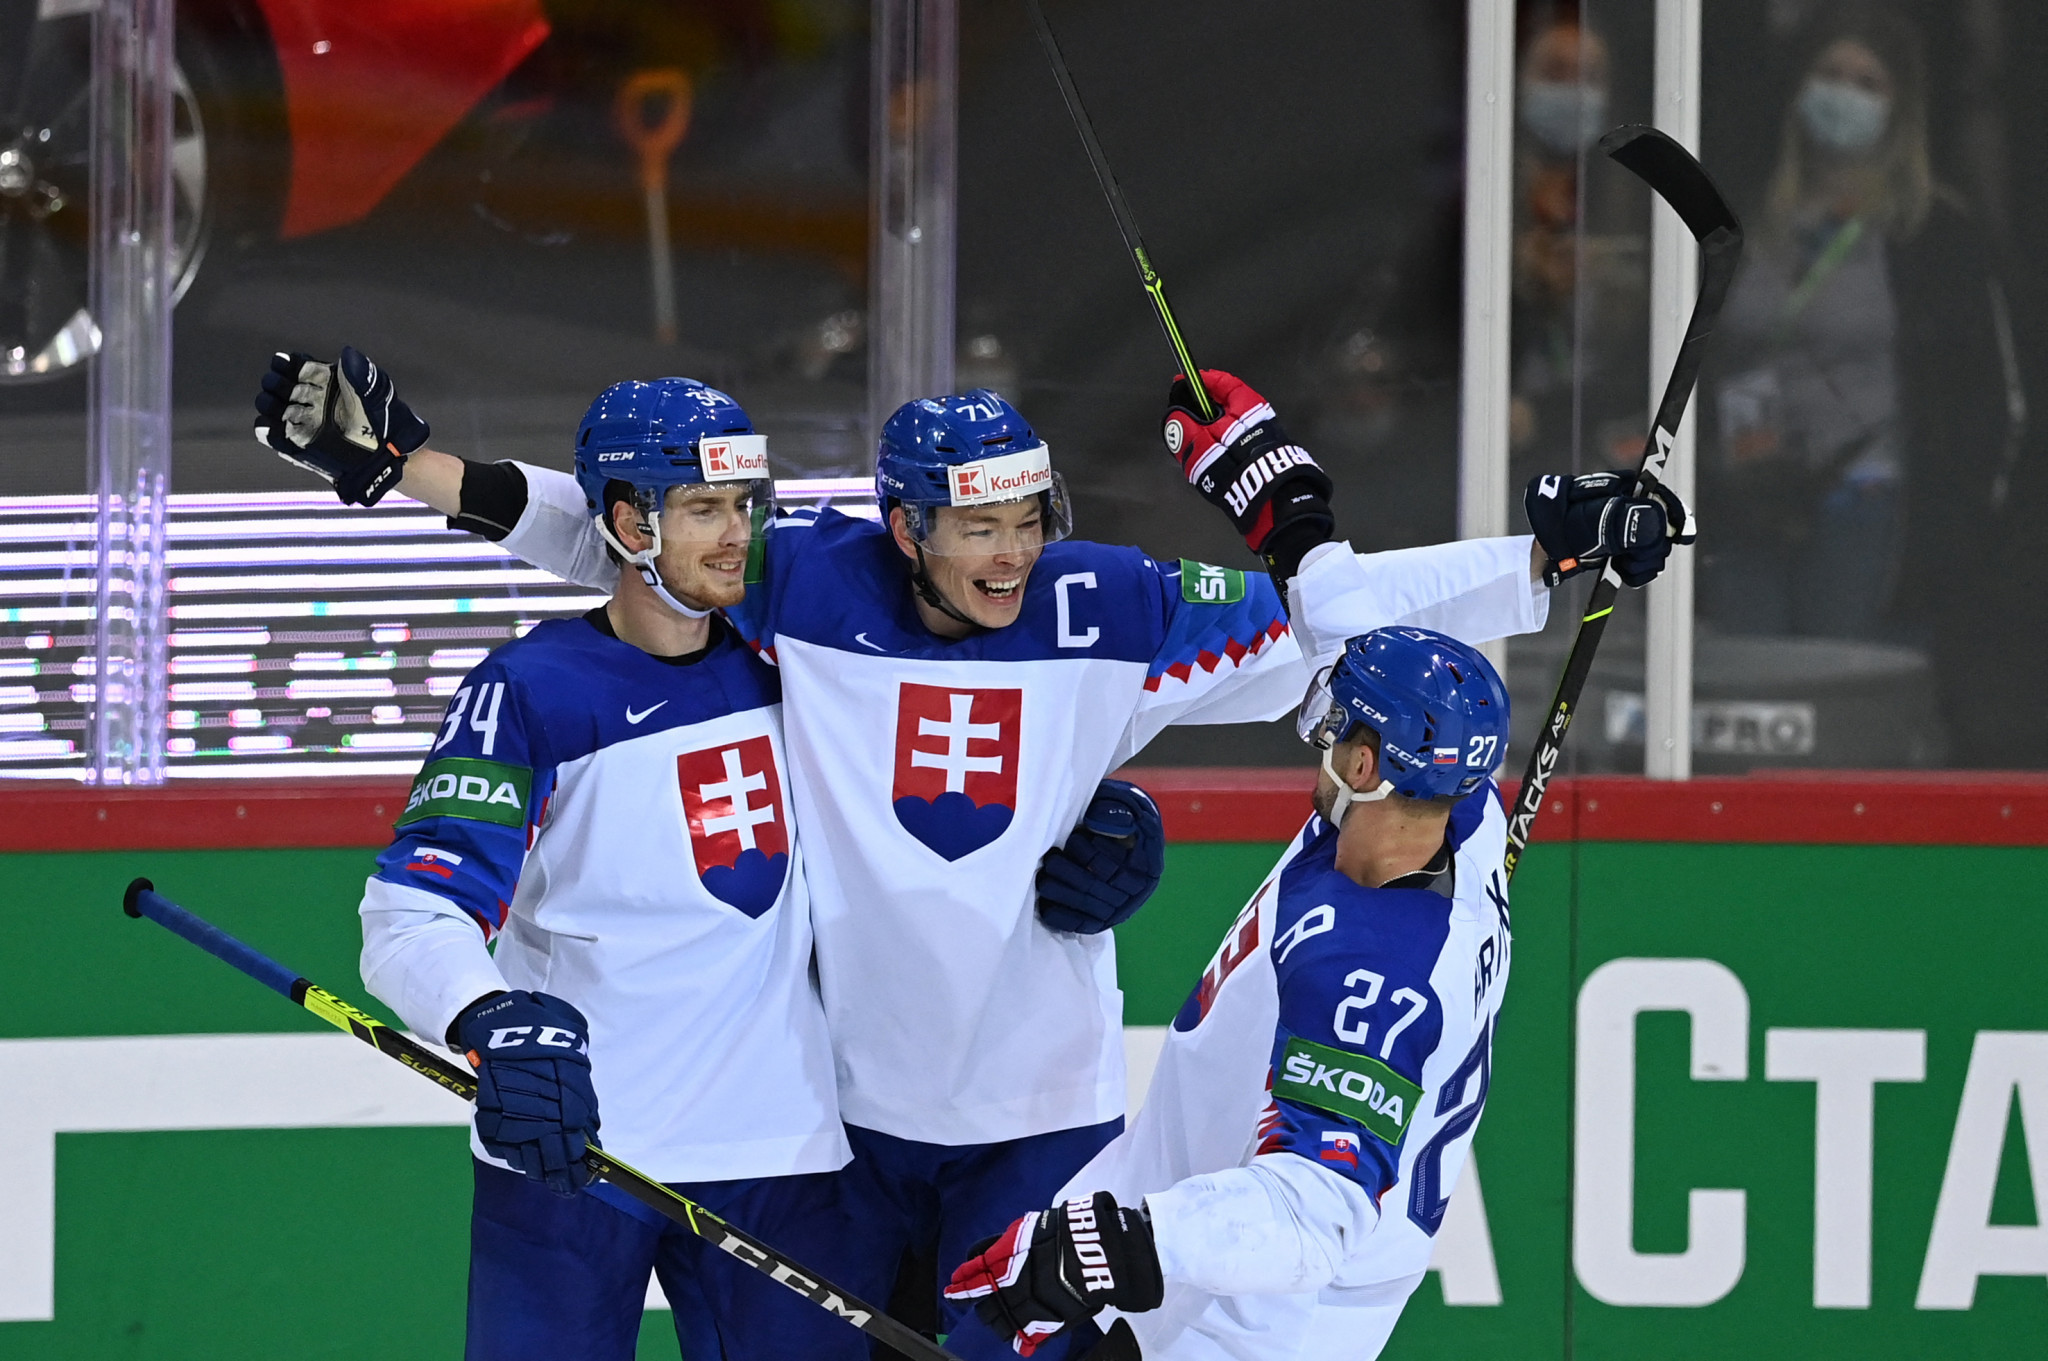 Slovakia team will be missing their KHL players for this year's IIHF World Championships after they decided not to select them ©Getty Images 